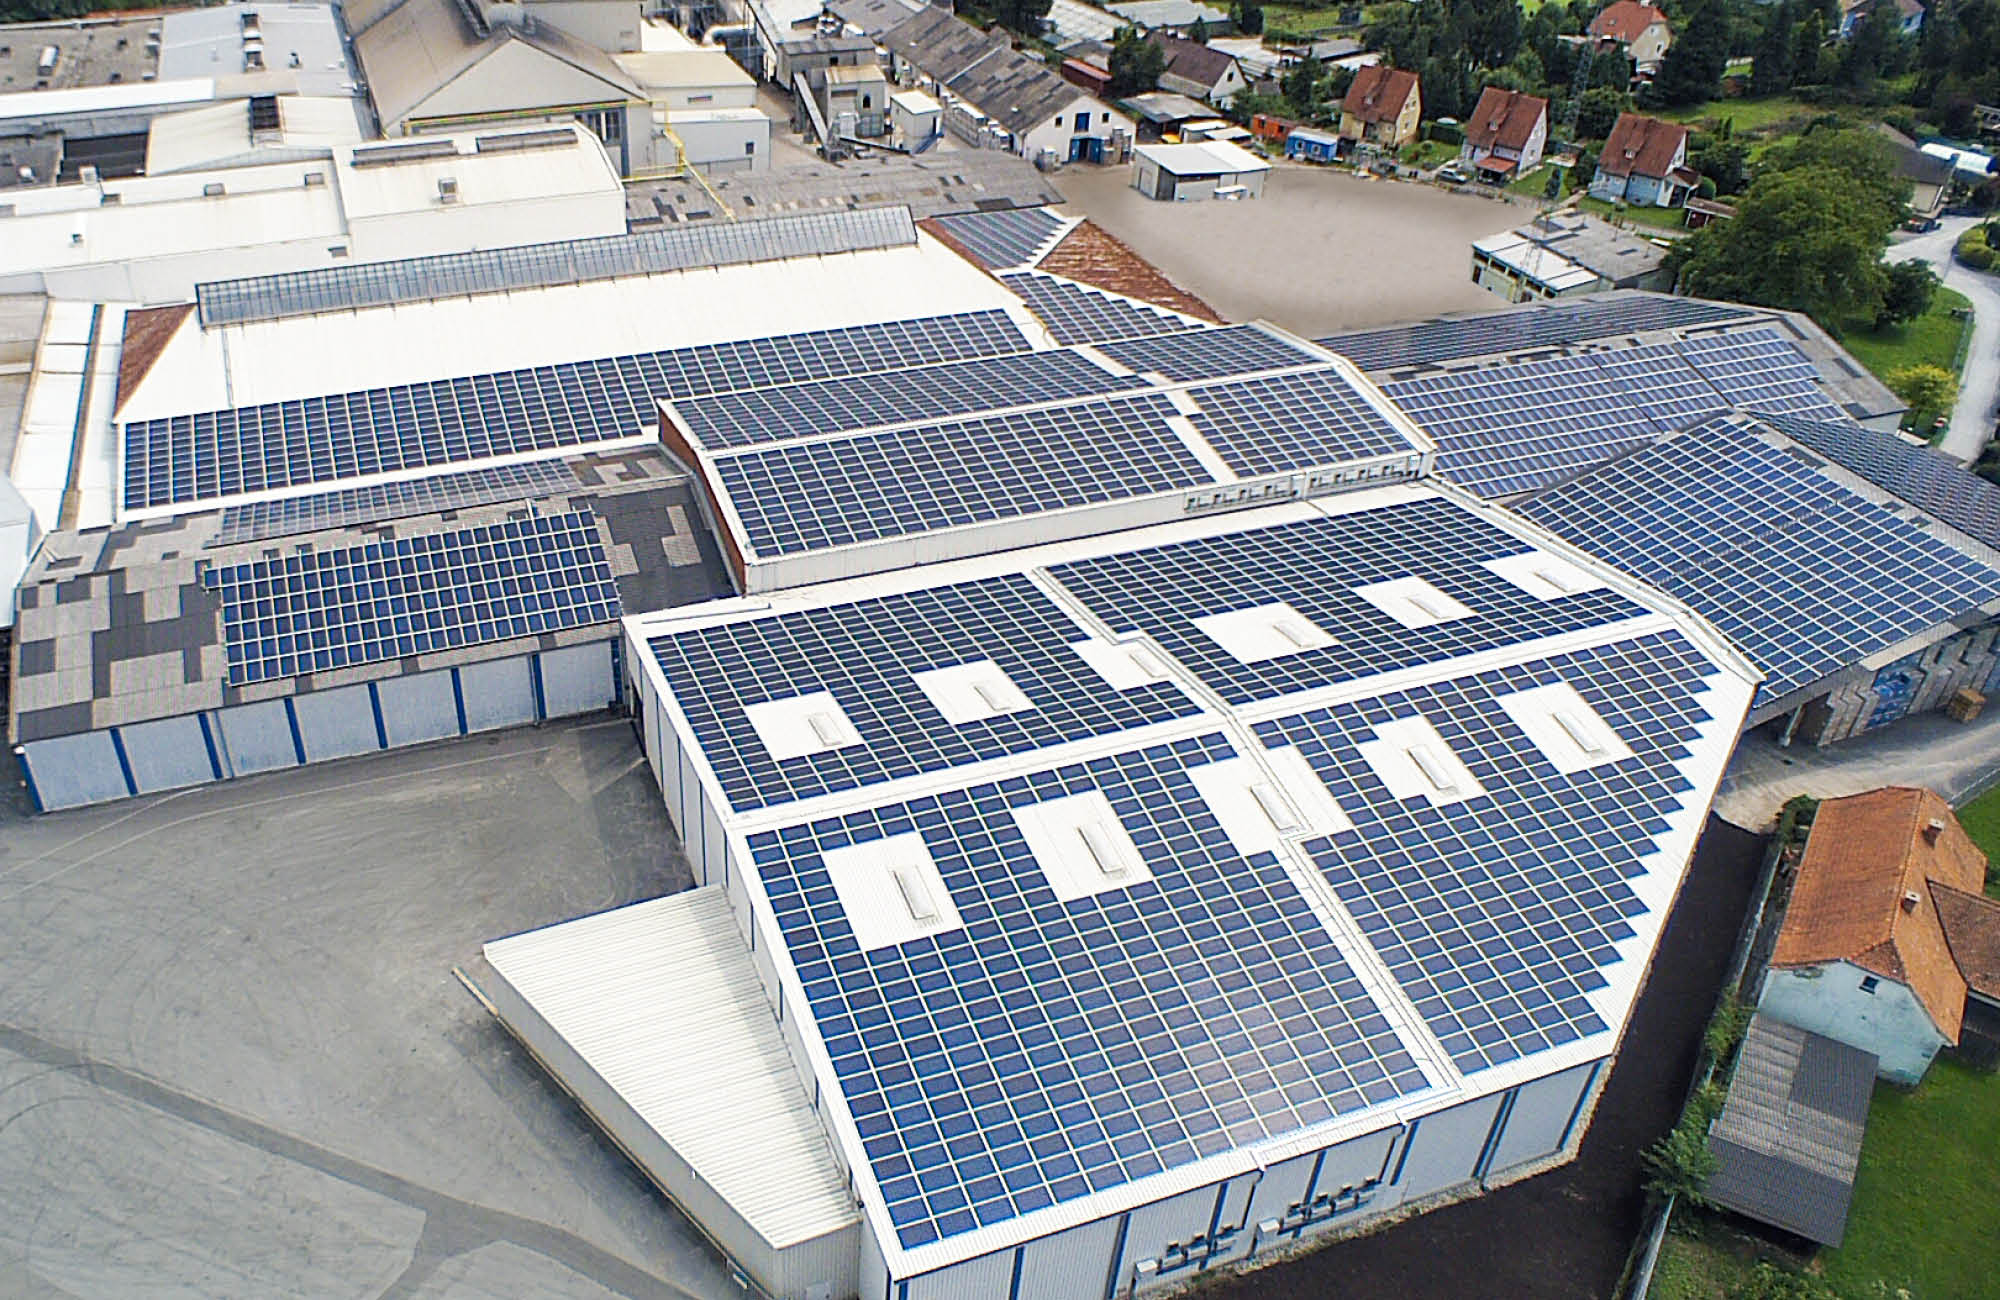 Photovoltaic system installed on the roof of the Austria production site